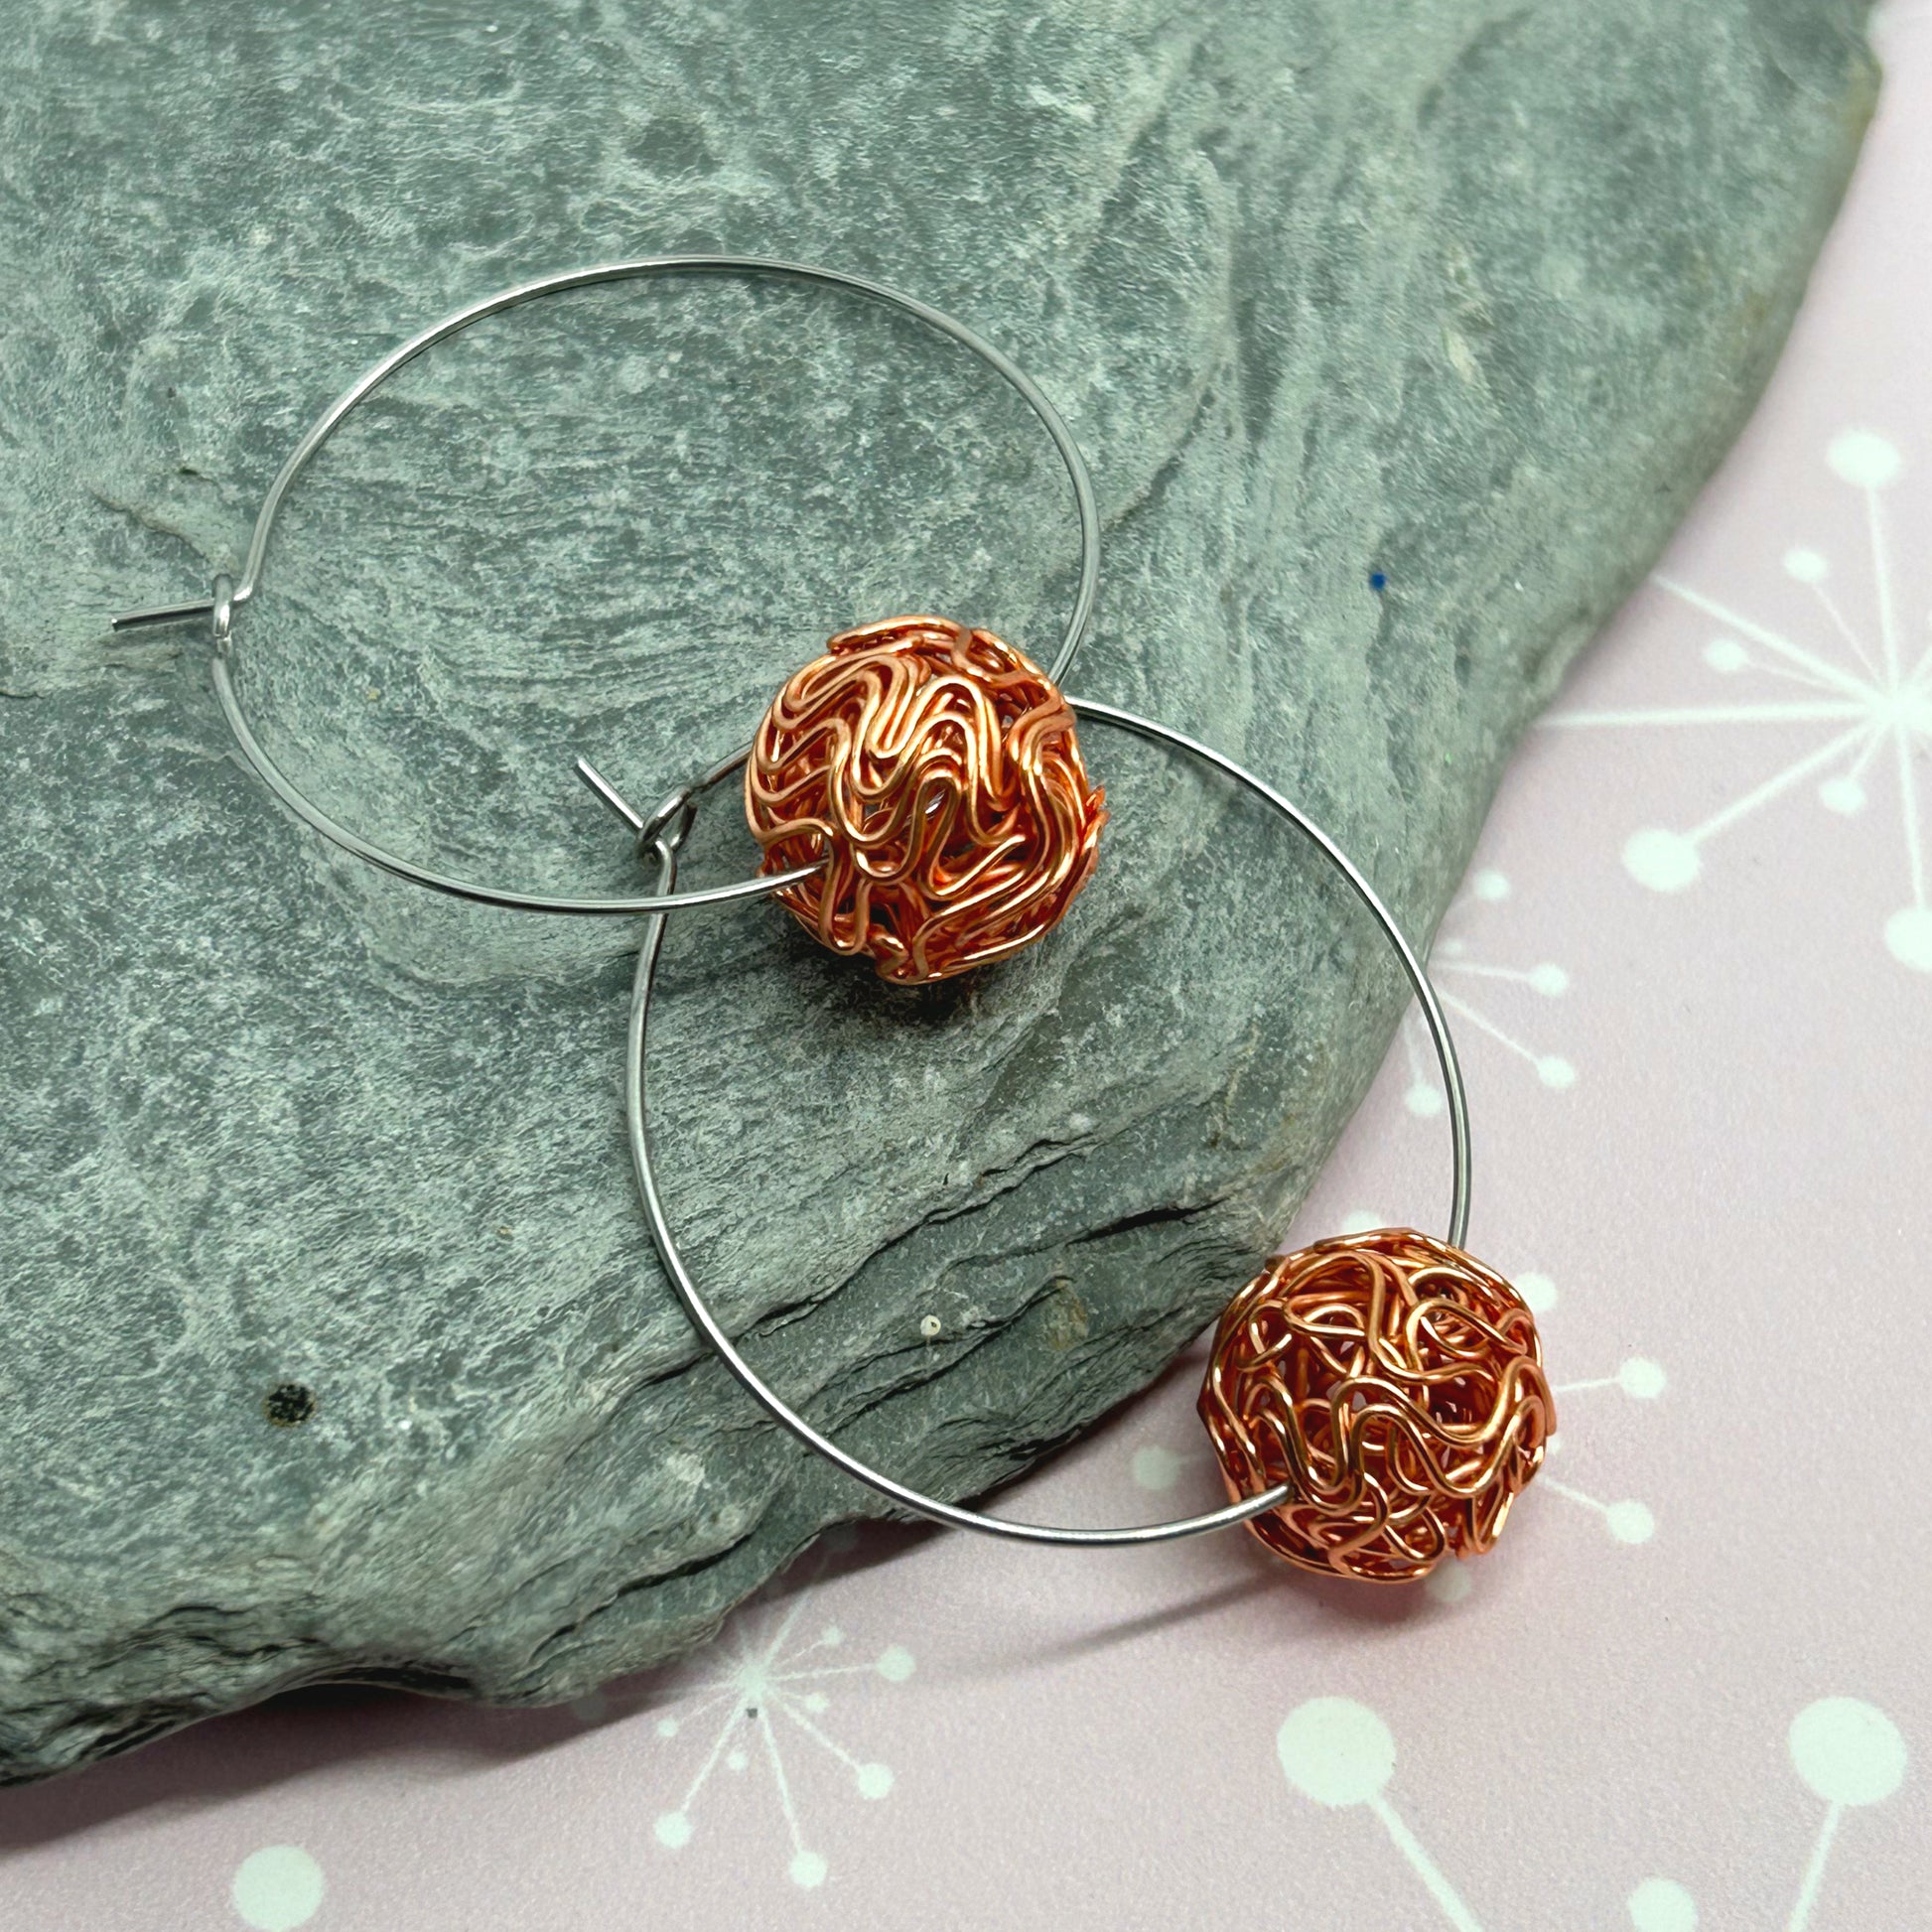 You're winding me up - ball hoop earrings - The Argentum Design Co